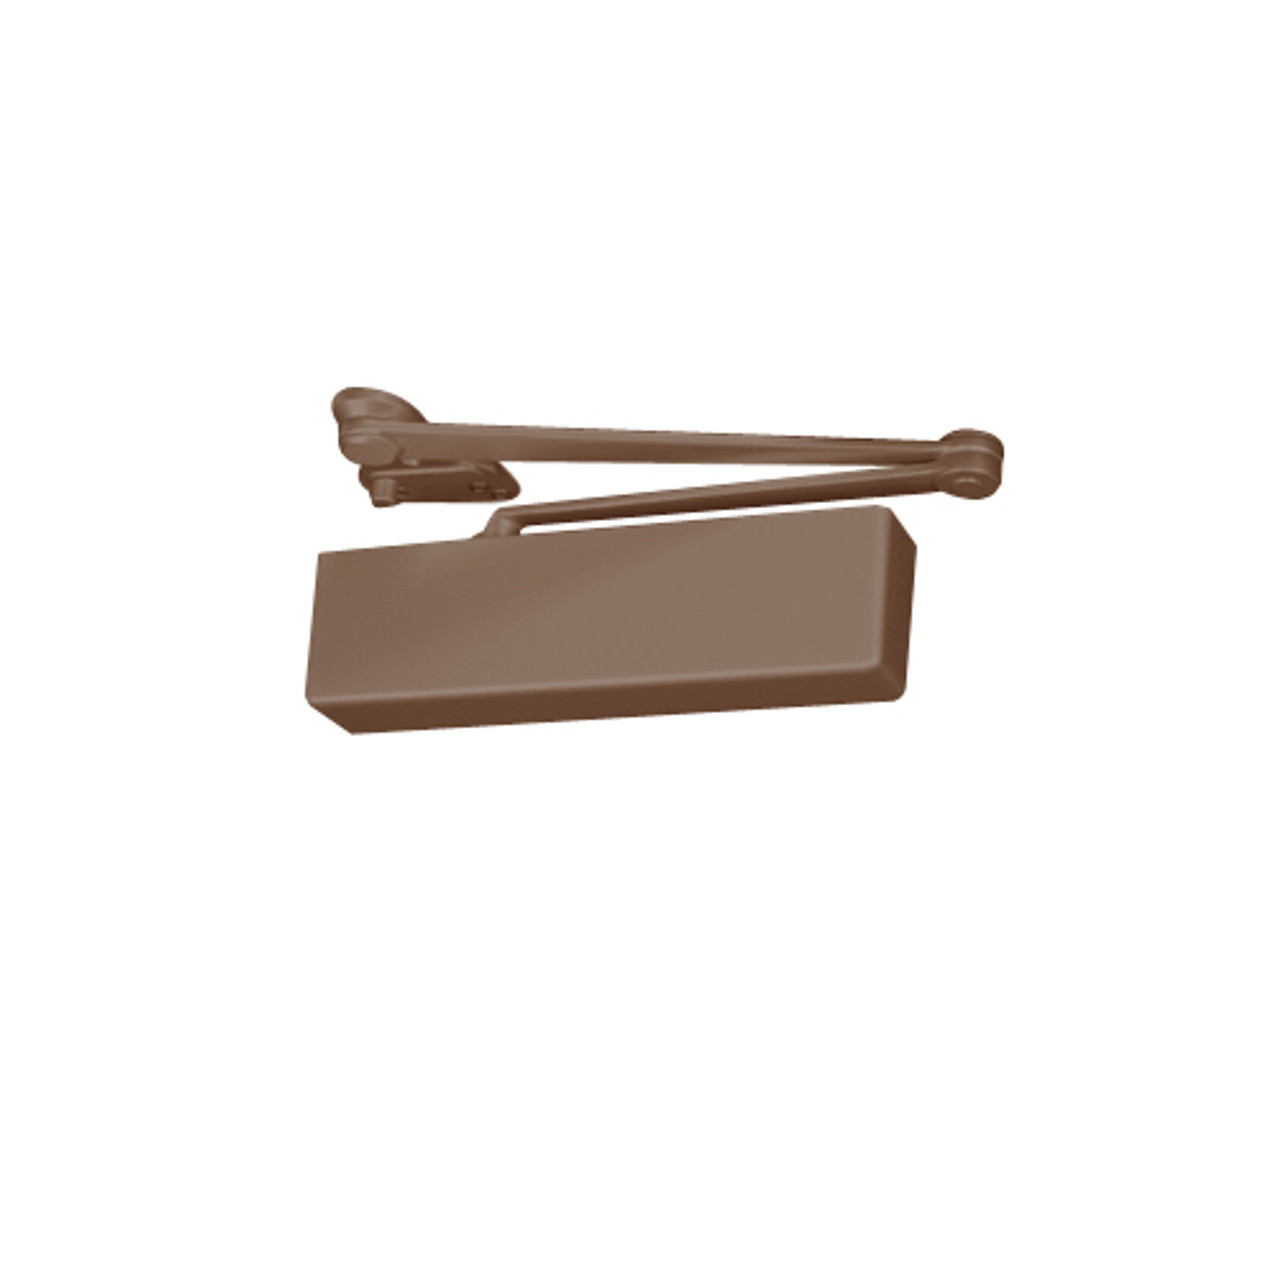 CLP7500TDA-691 Norton 7500 Series Hold Open Institutional Door Closer with CloserPlus Arm in Dull Bronze Finish